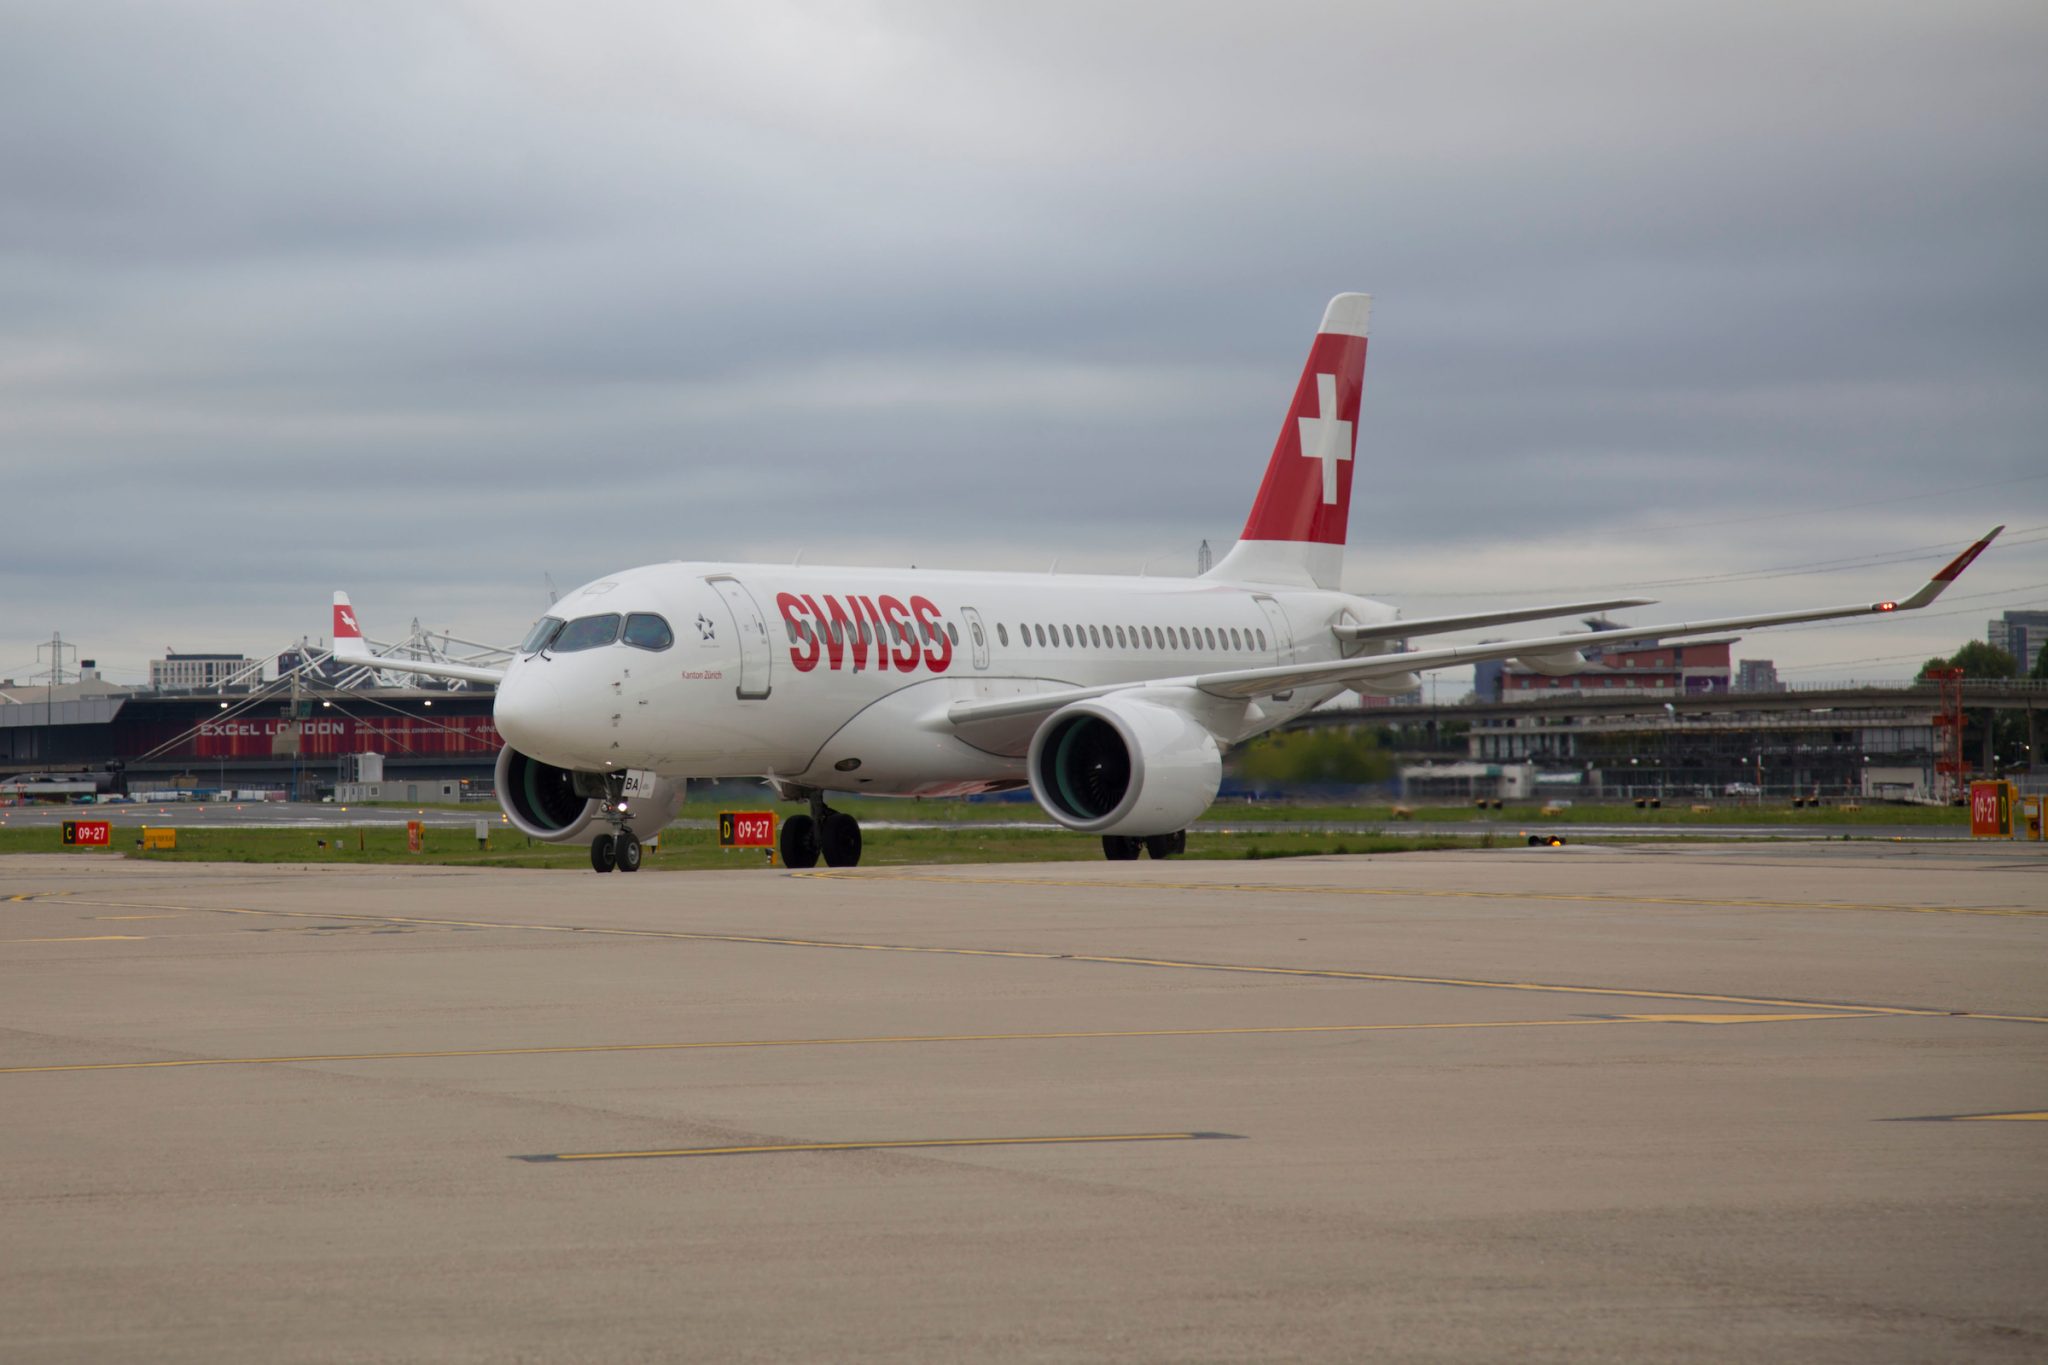 Bombardier C Series aircraft completes first commercial flight into London City Airport